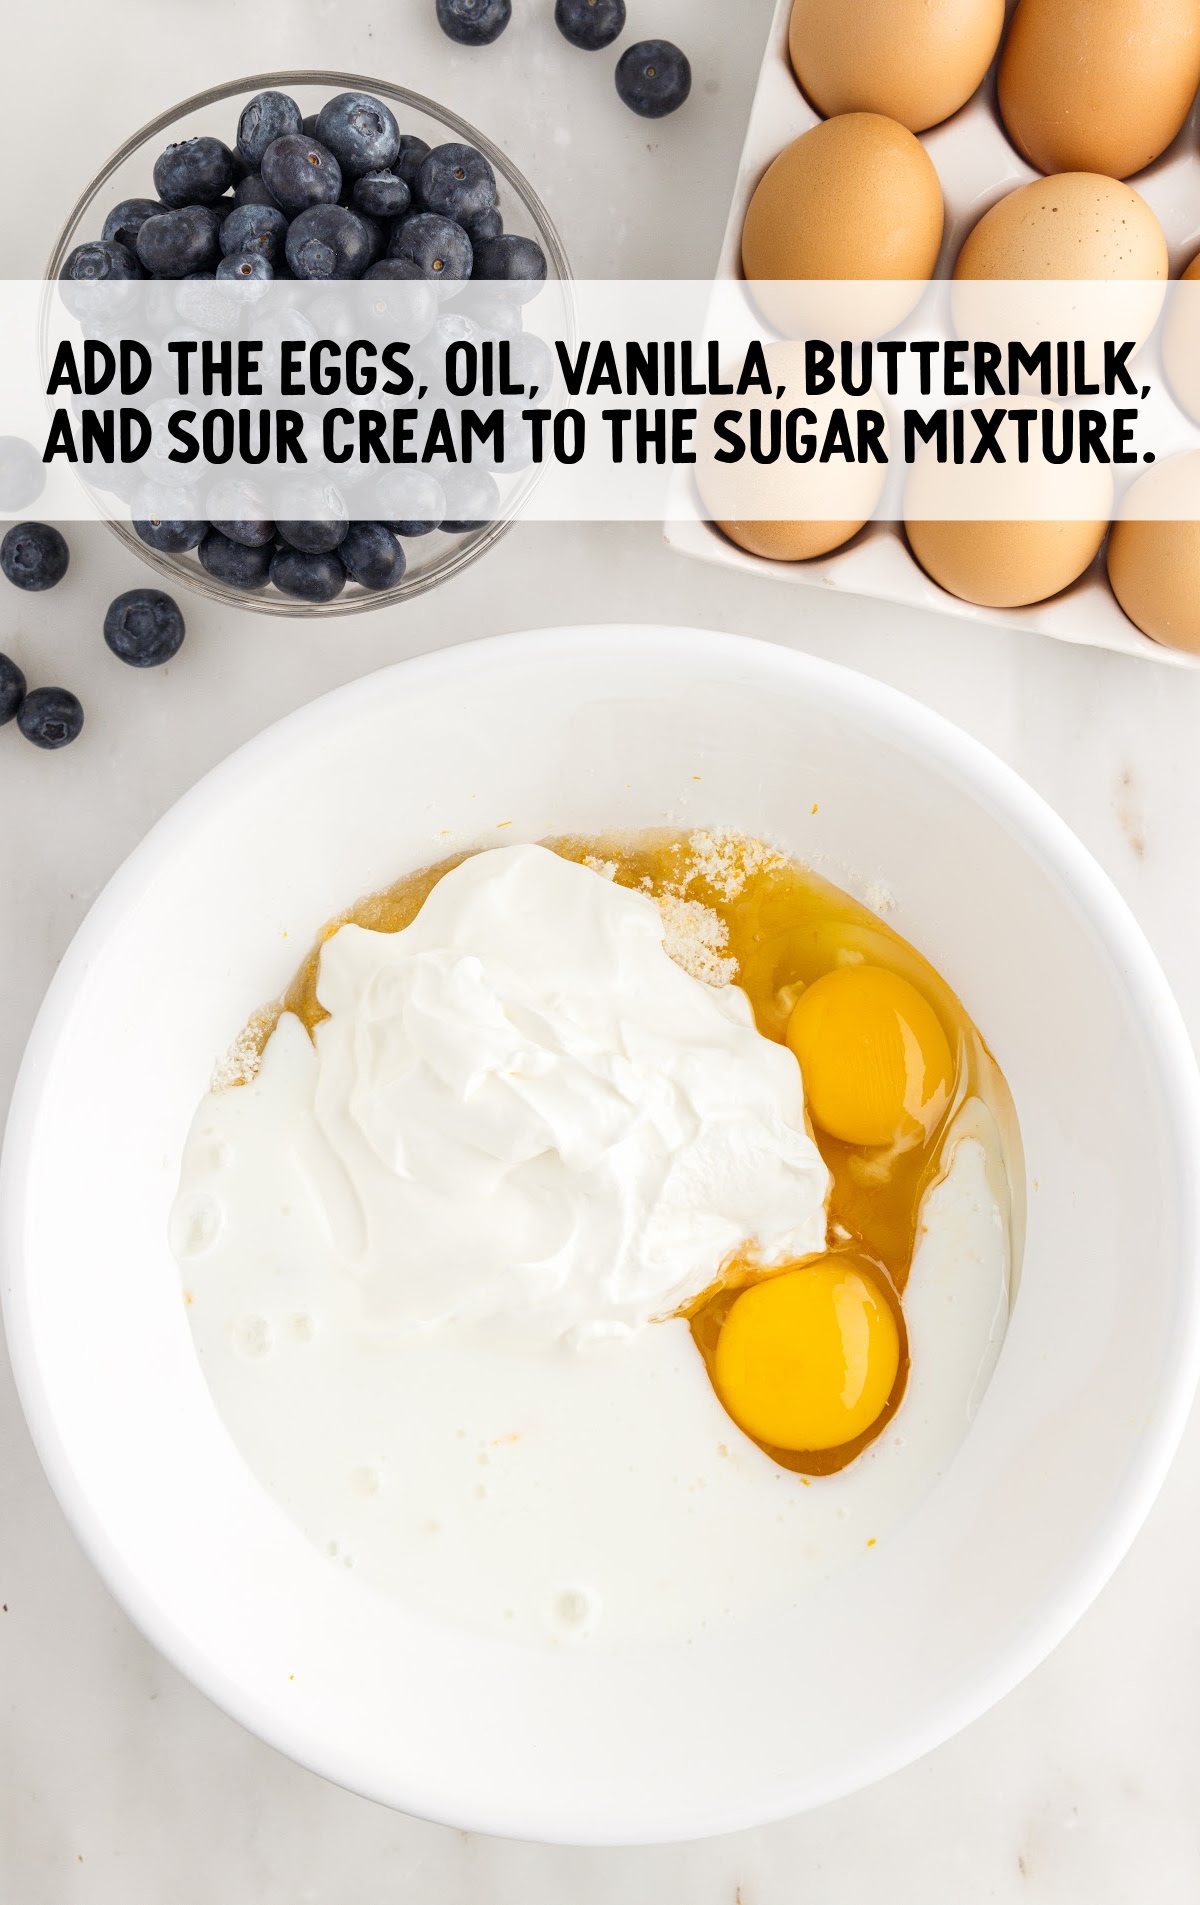 egg, oil, vanilla, buttermilk, and sour cream added to the sugar mixture